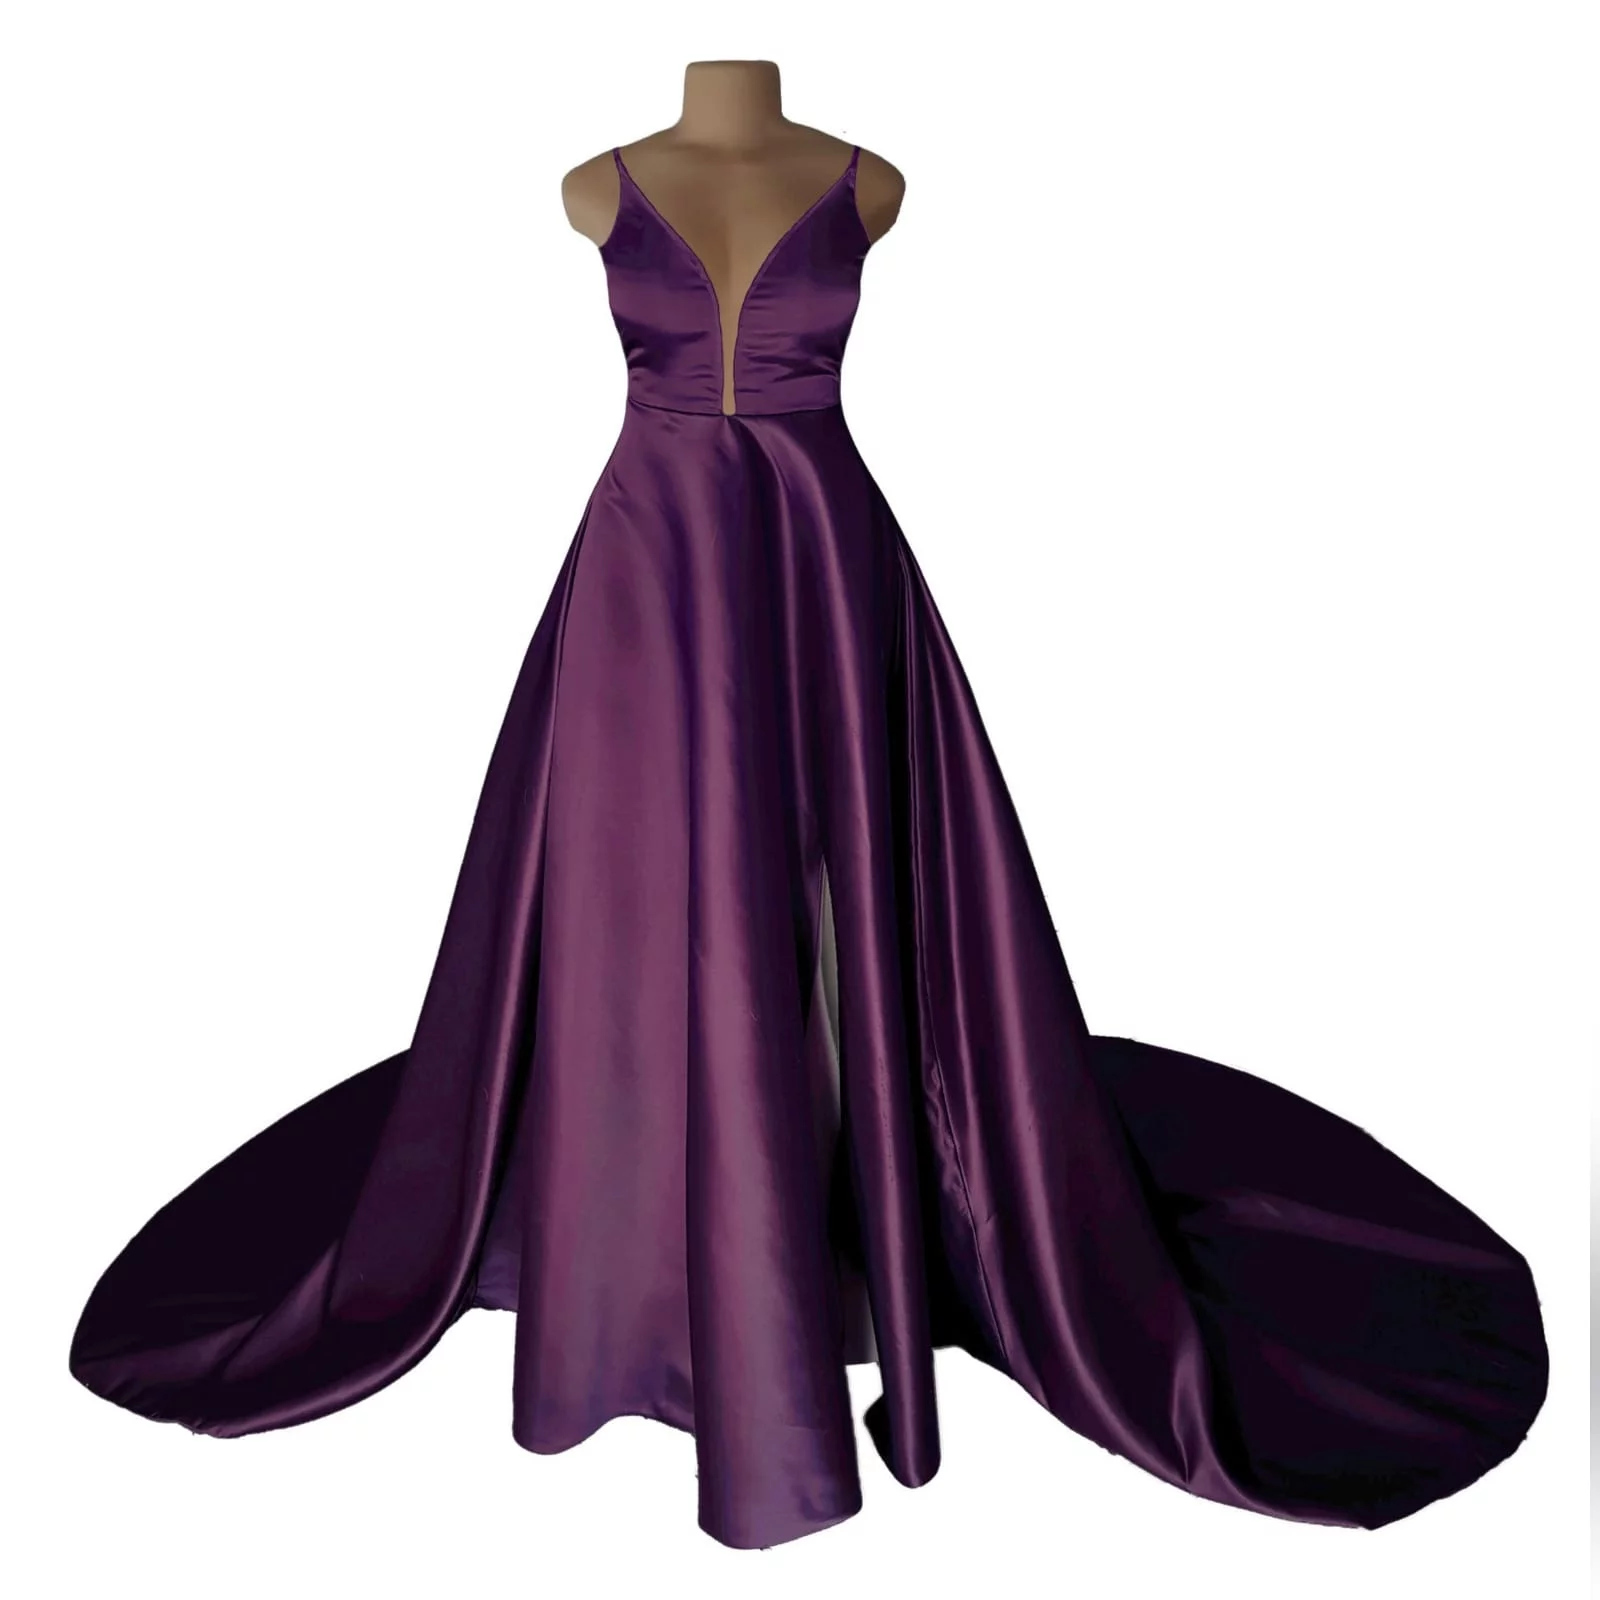 Plum long flowy prom dress with a plunging neckline 7 plum long flowy prom dress with a plunging neckline and a lace up open back with a slit and train.